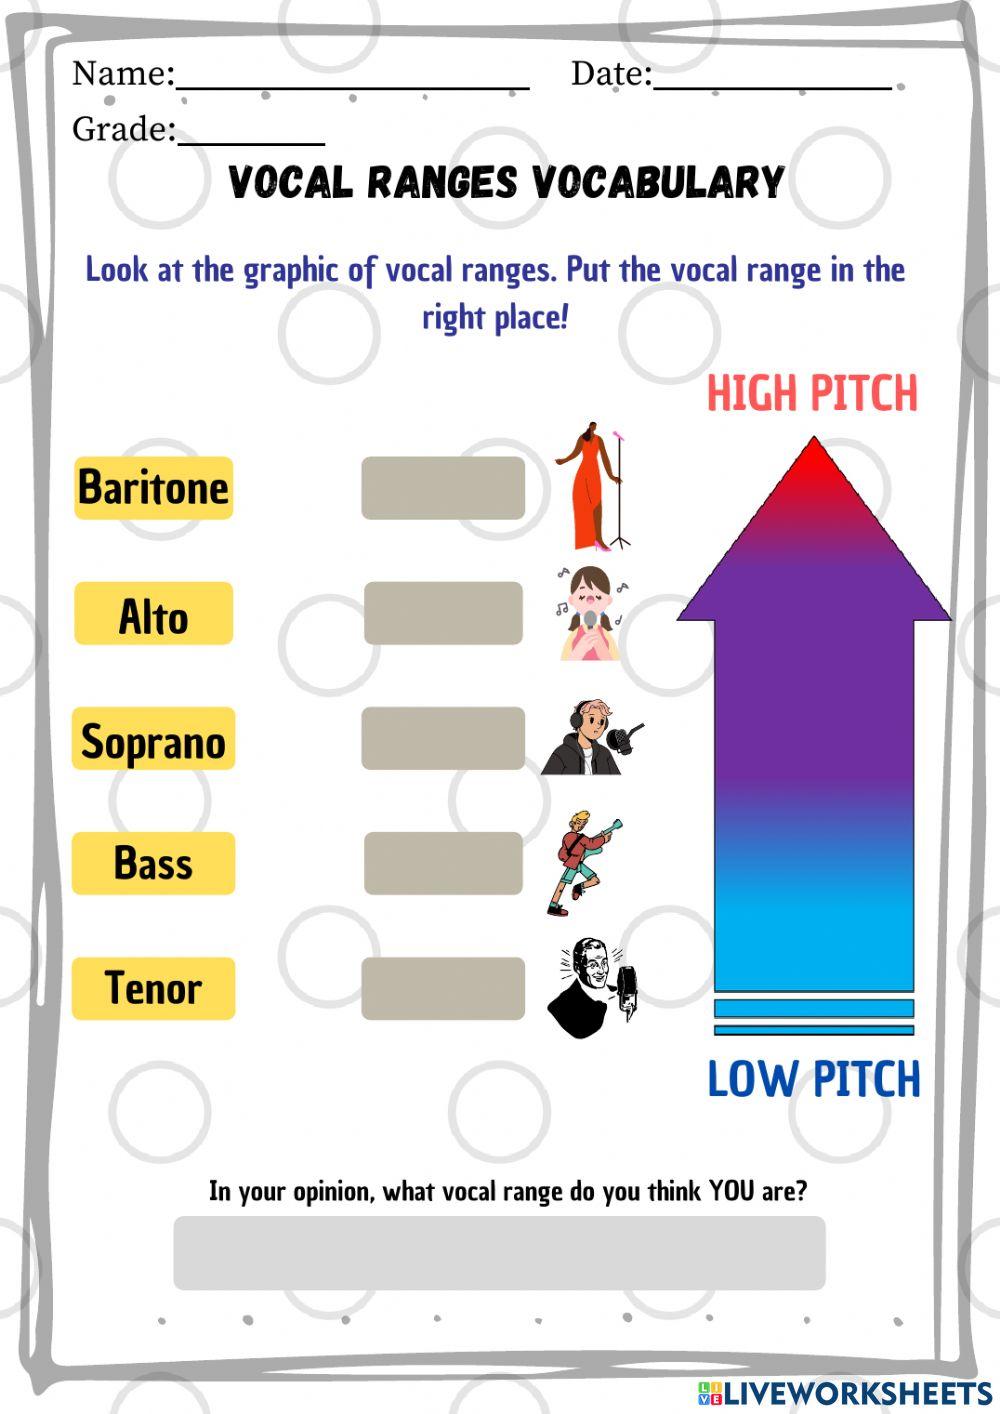 (Cycle 2 Session 13 Annex 1) vocal range vocabulary